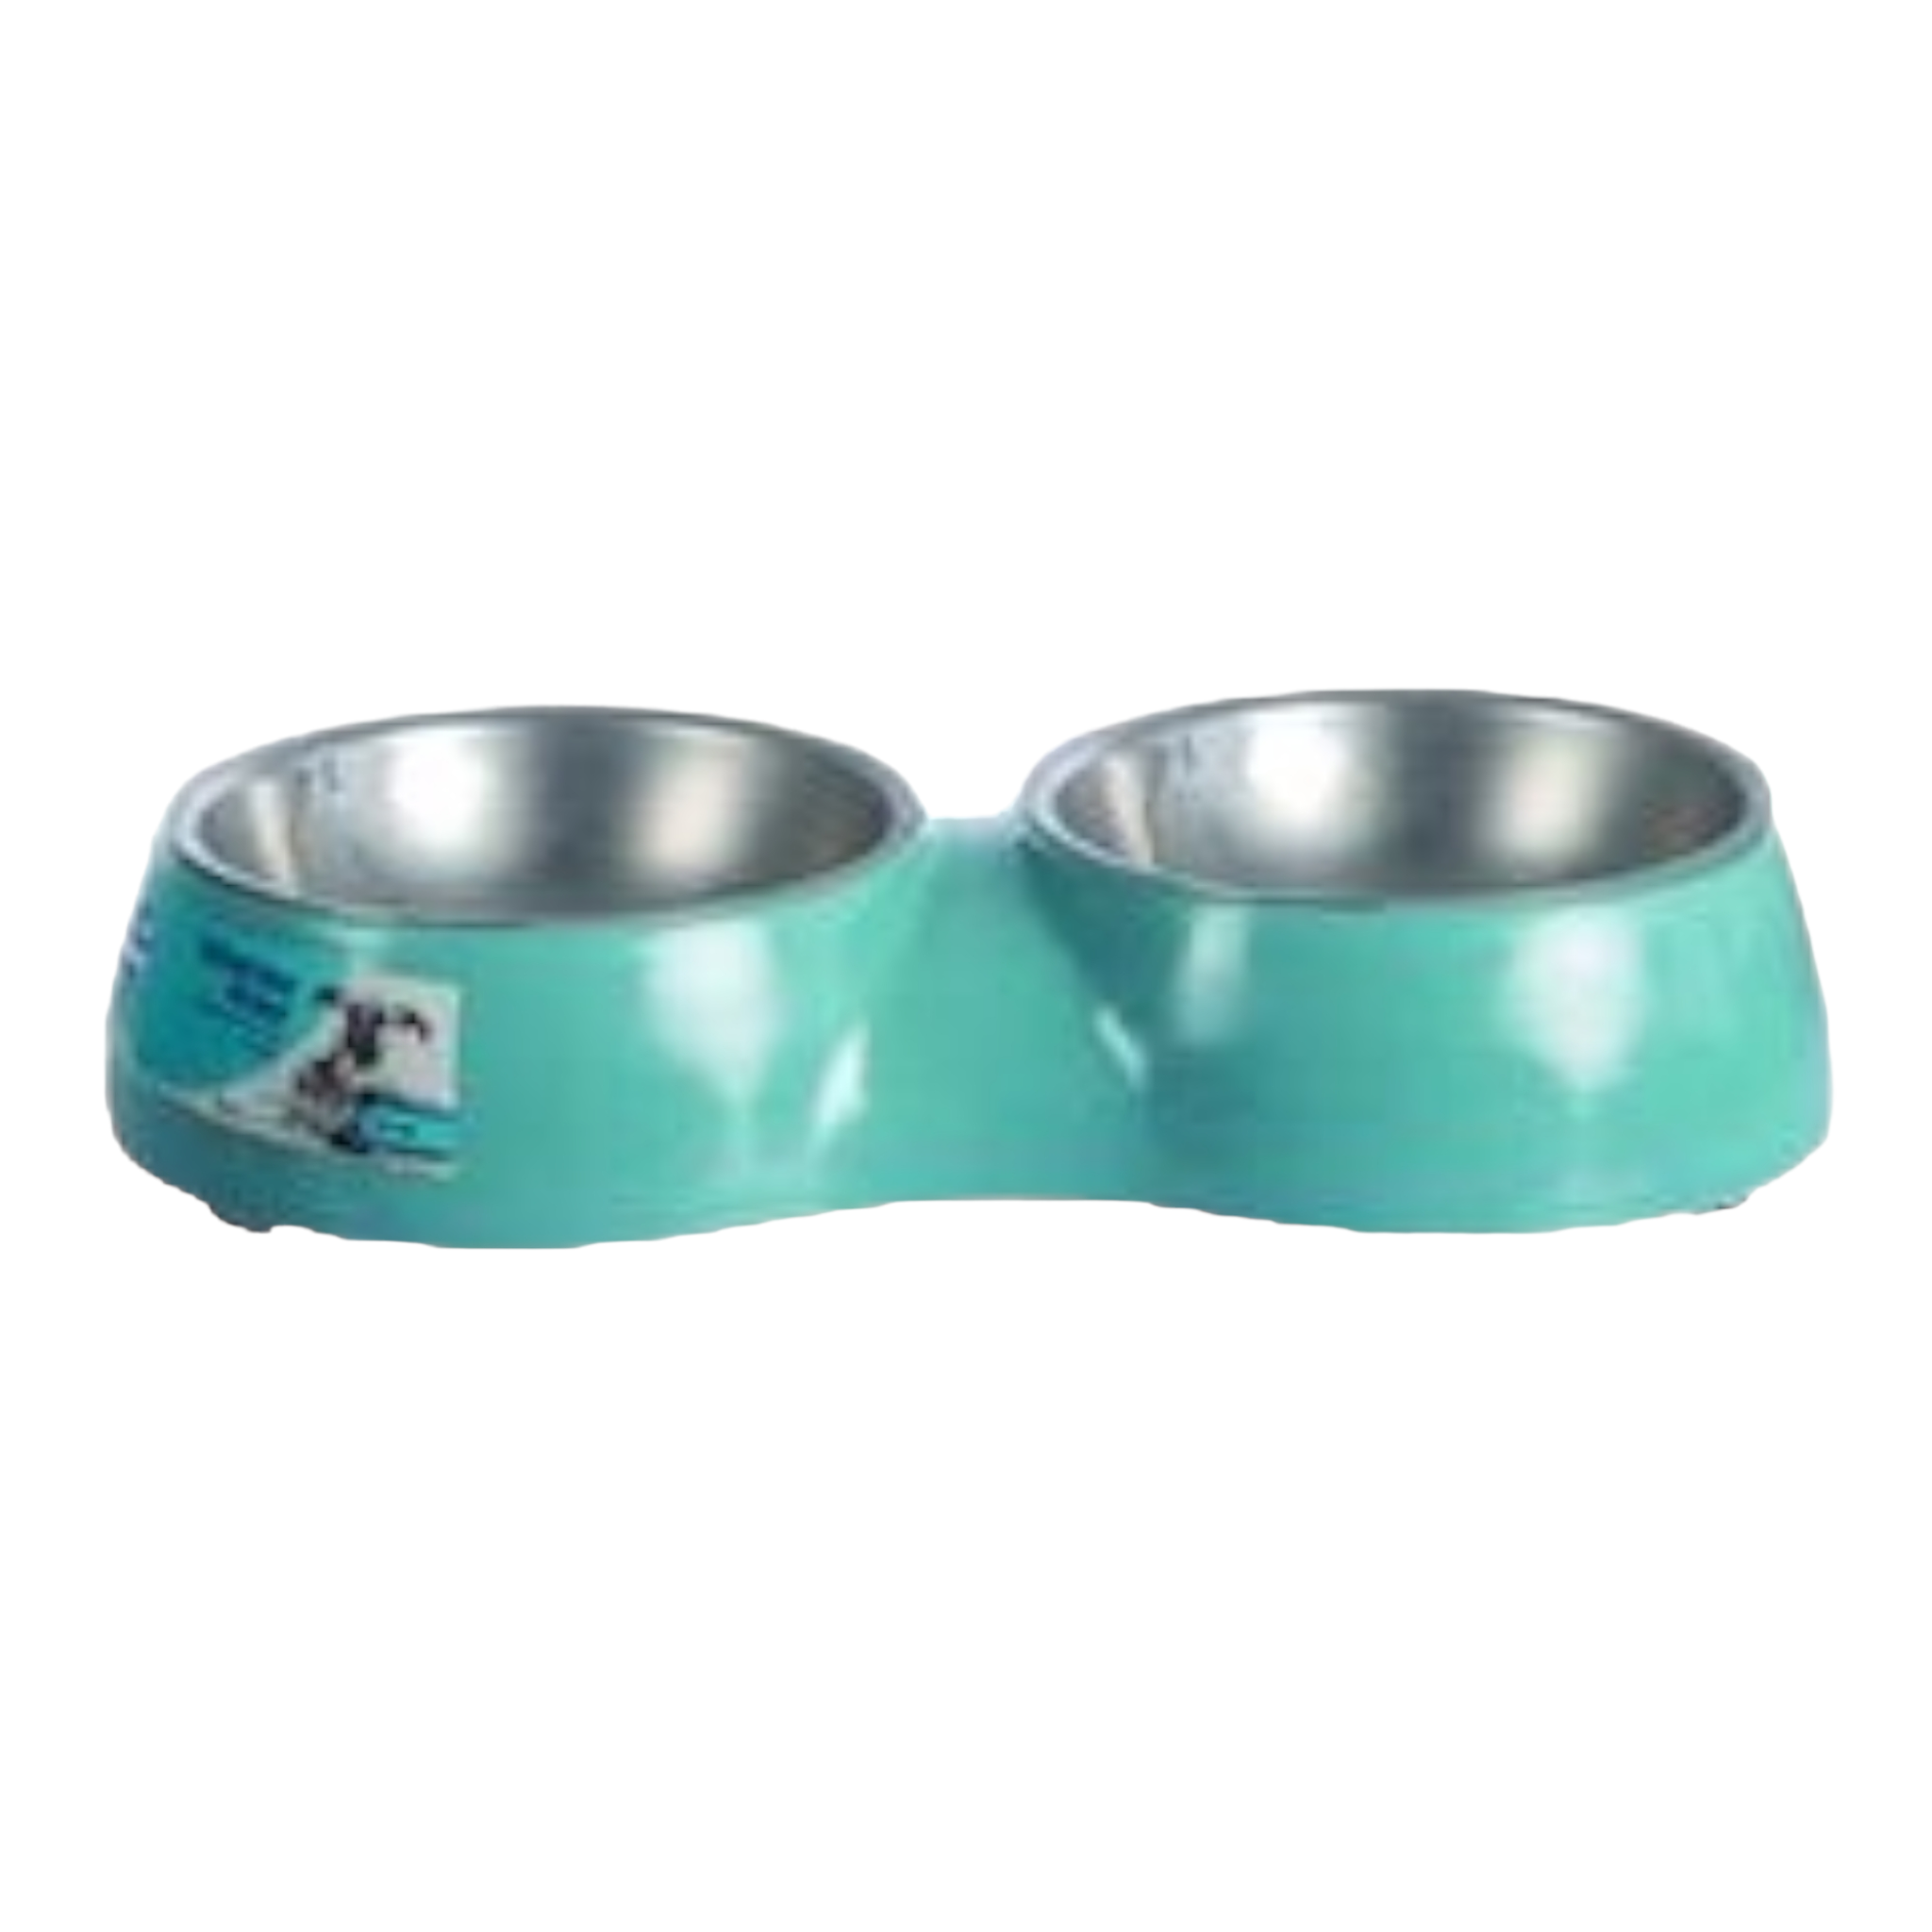 Pet Mall Dog/Cat Bowl 123cm Plastic with Stainless Steel Double